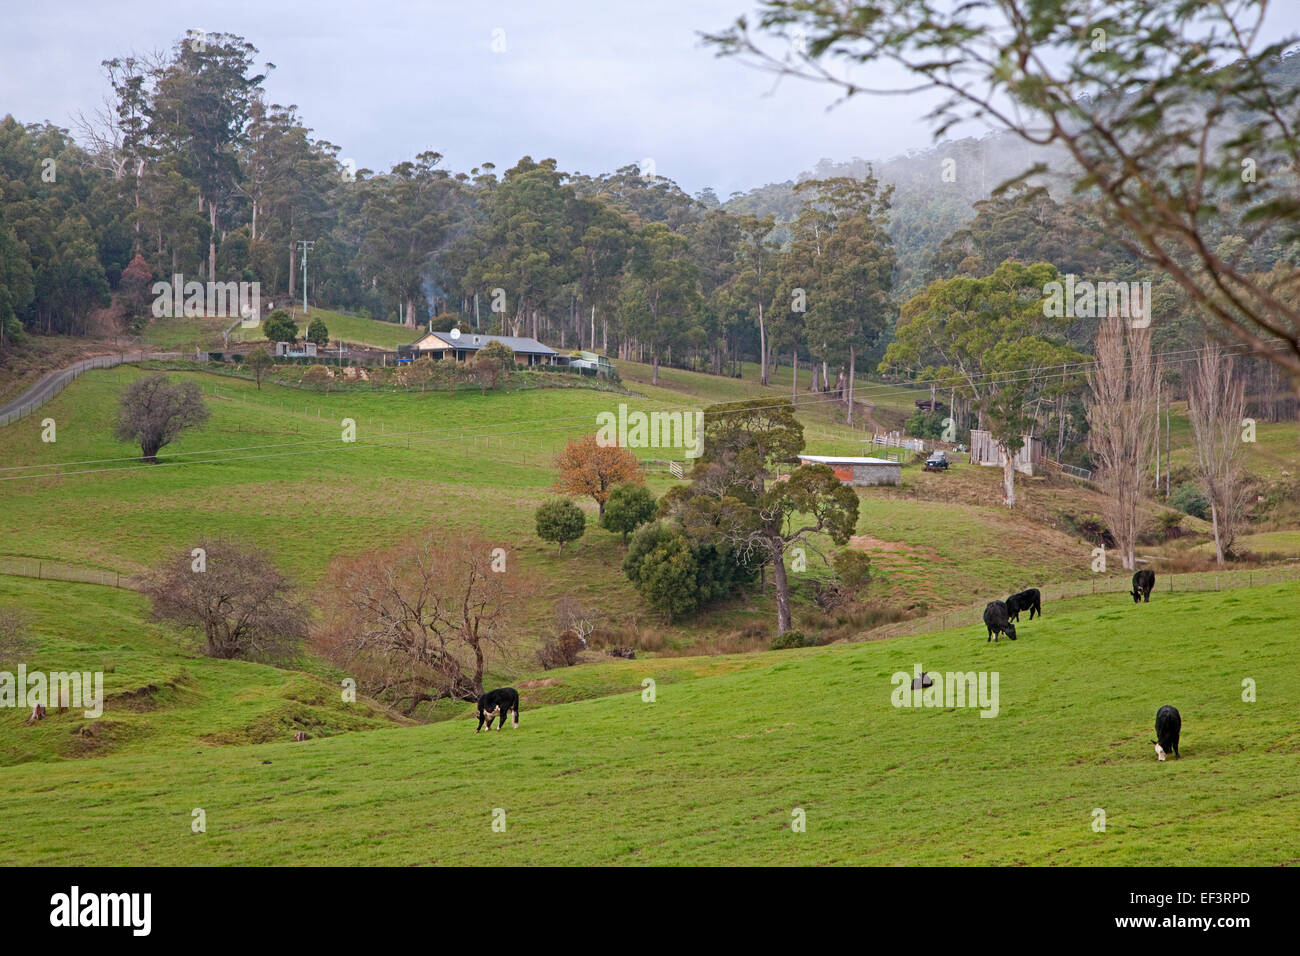 Countryside showing farm and cows in meadow in winter, Tasmania, Australia Stock Photo